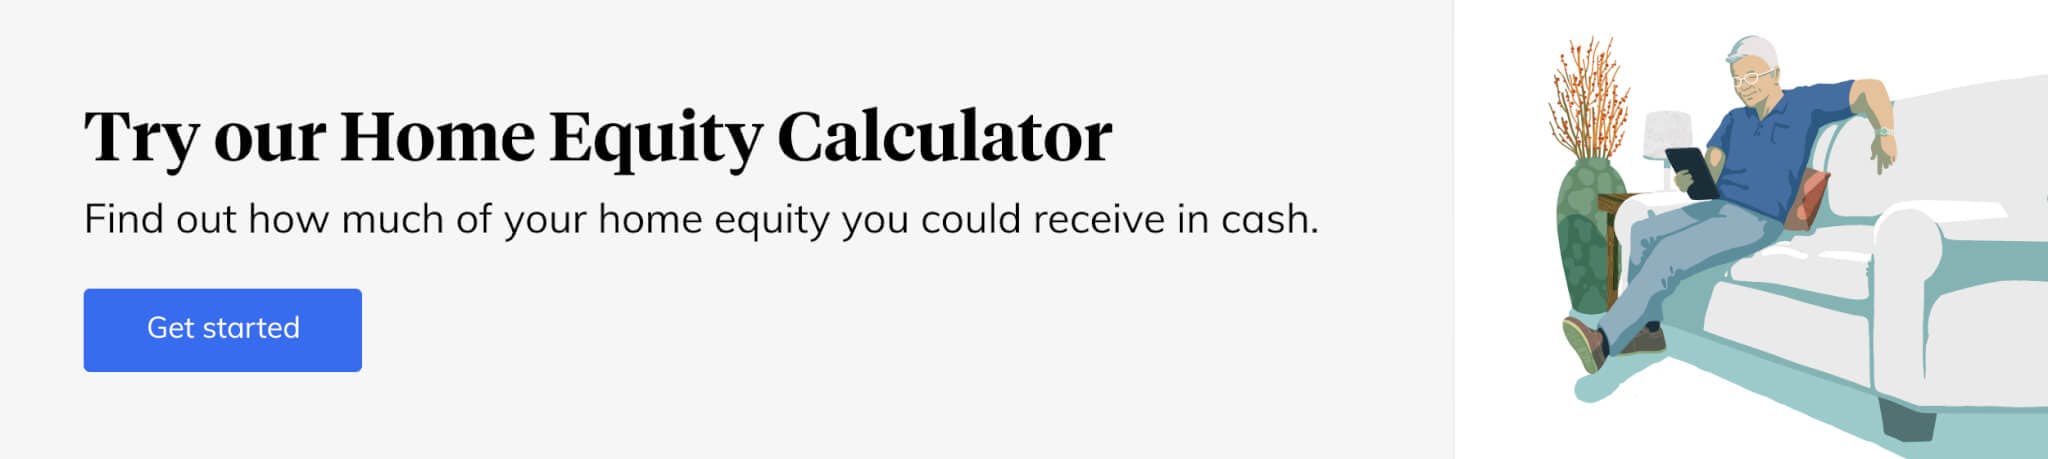 home equity calculator banner